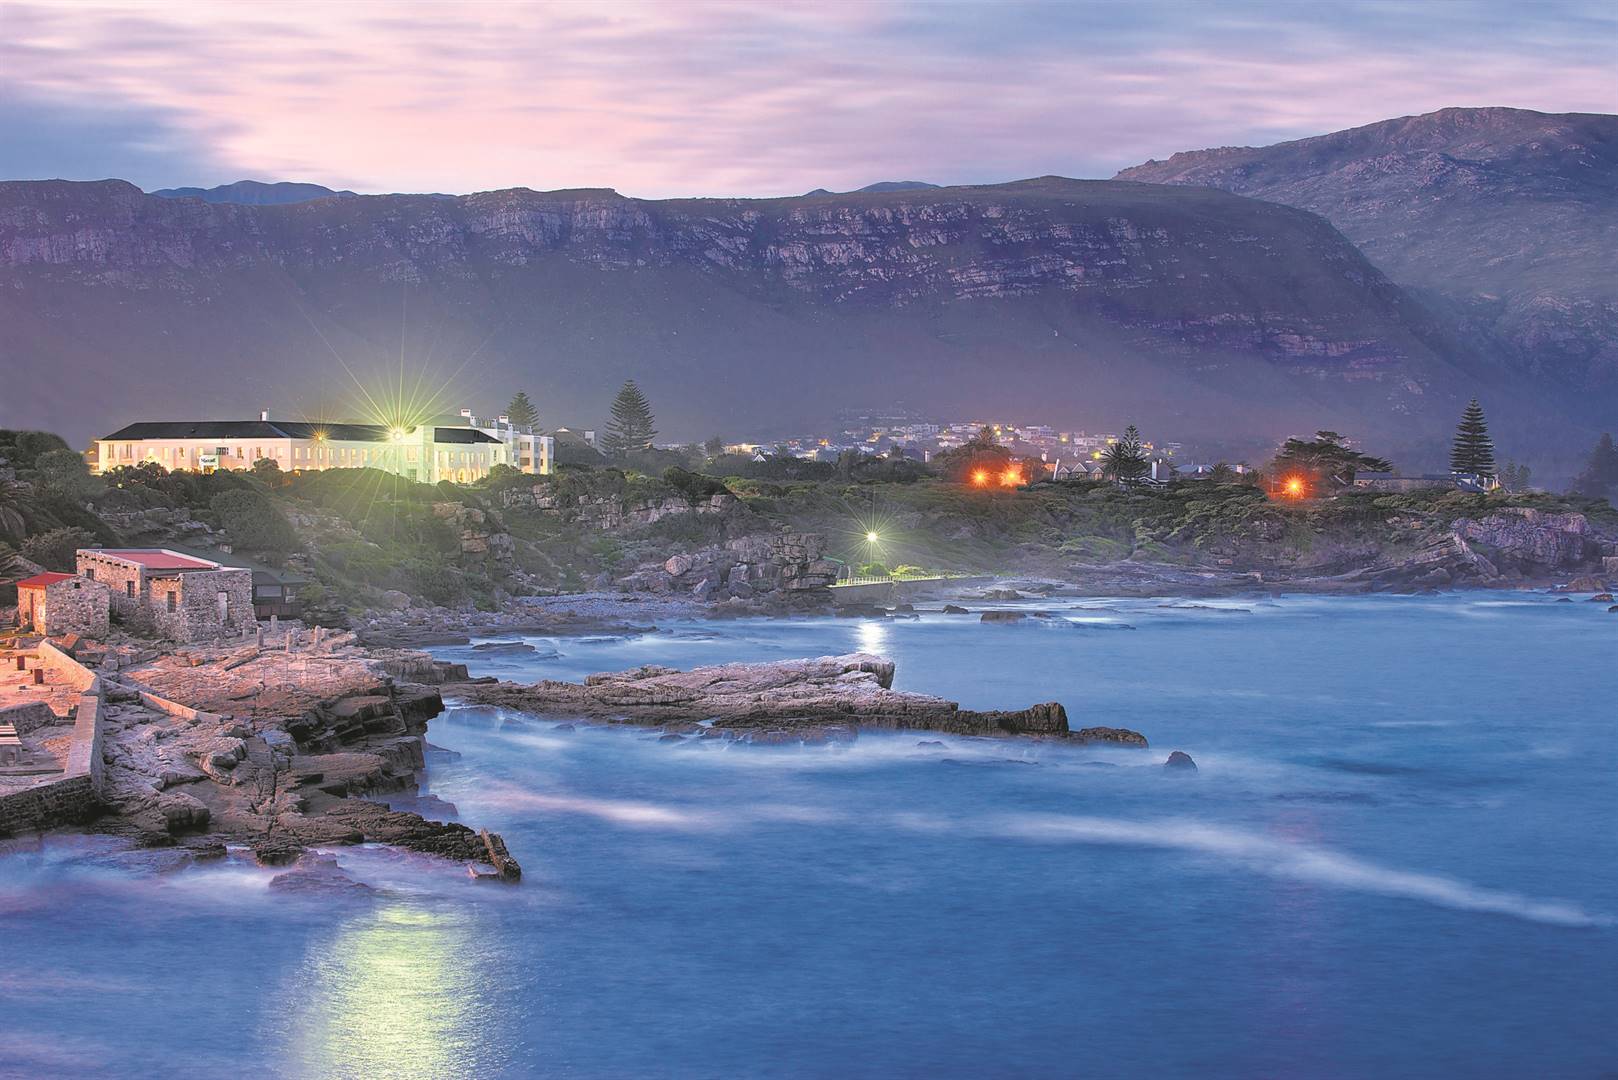 The Marine Hotel in Hermanus will join forces with some of the region’s most prestigious wine estates to offer a series of gourmet wine and food dinners during the upcoming months.